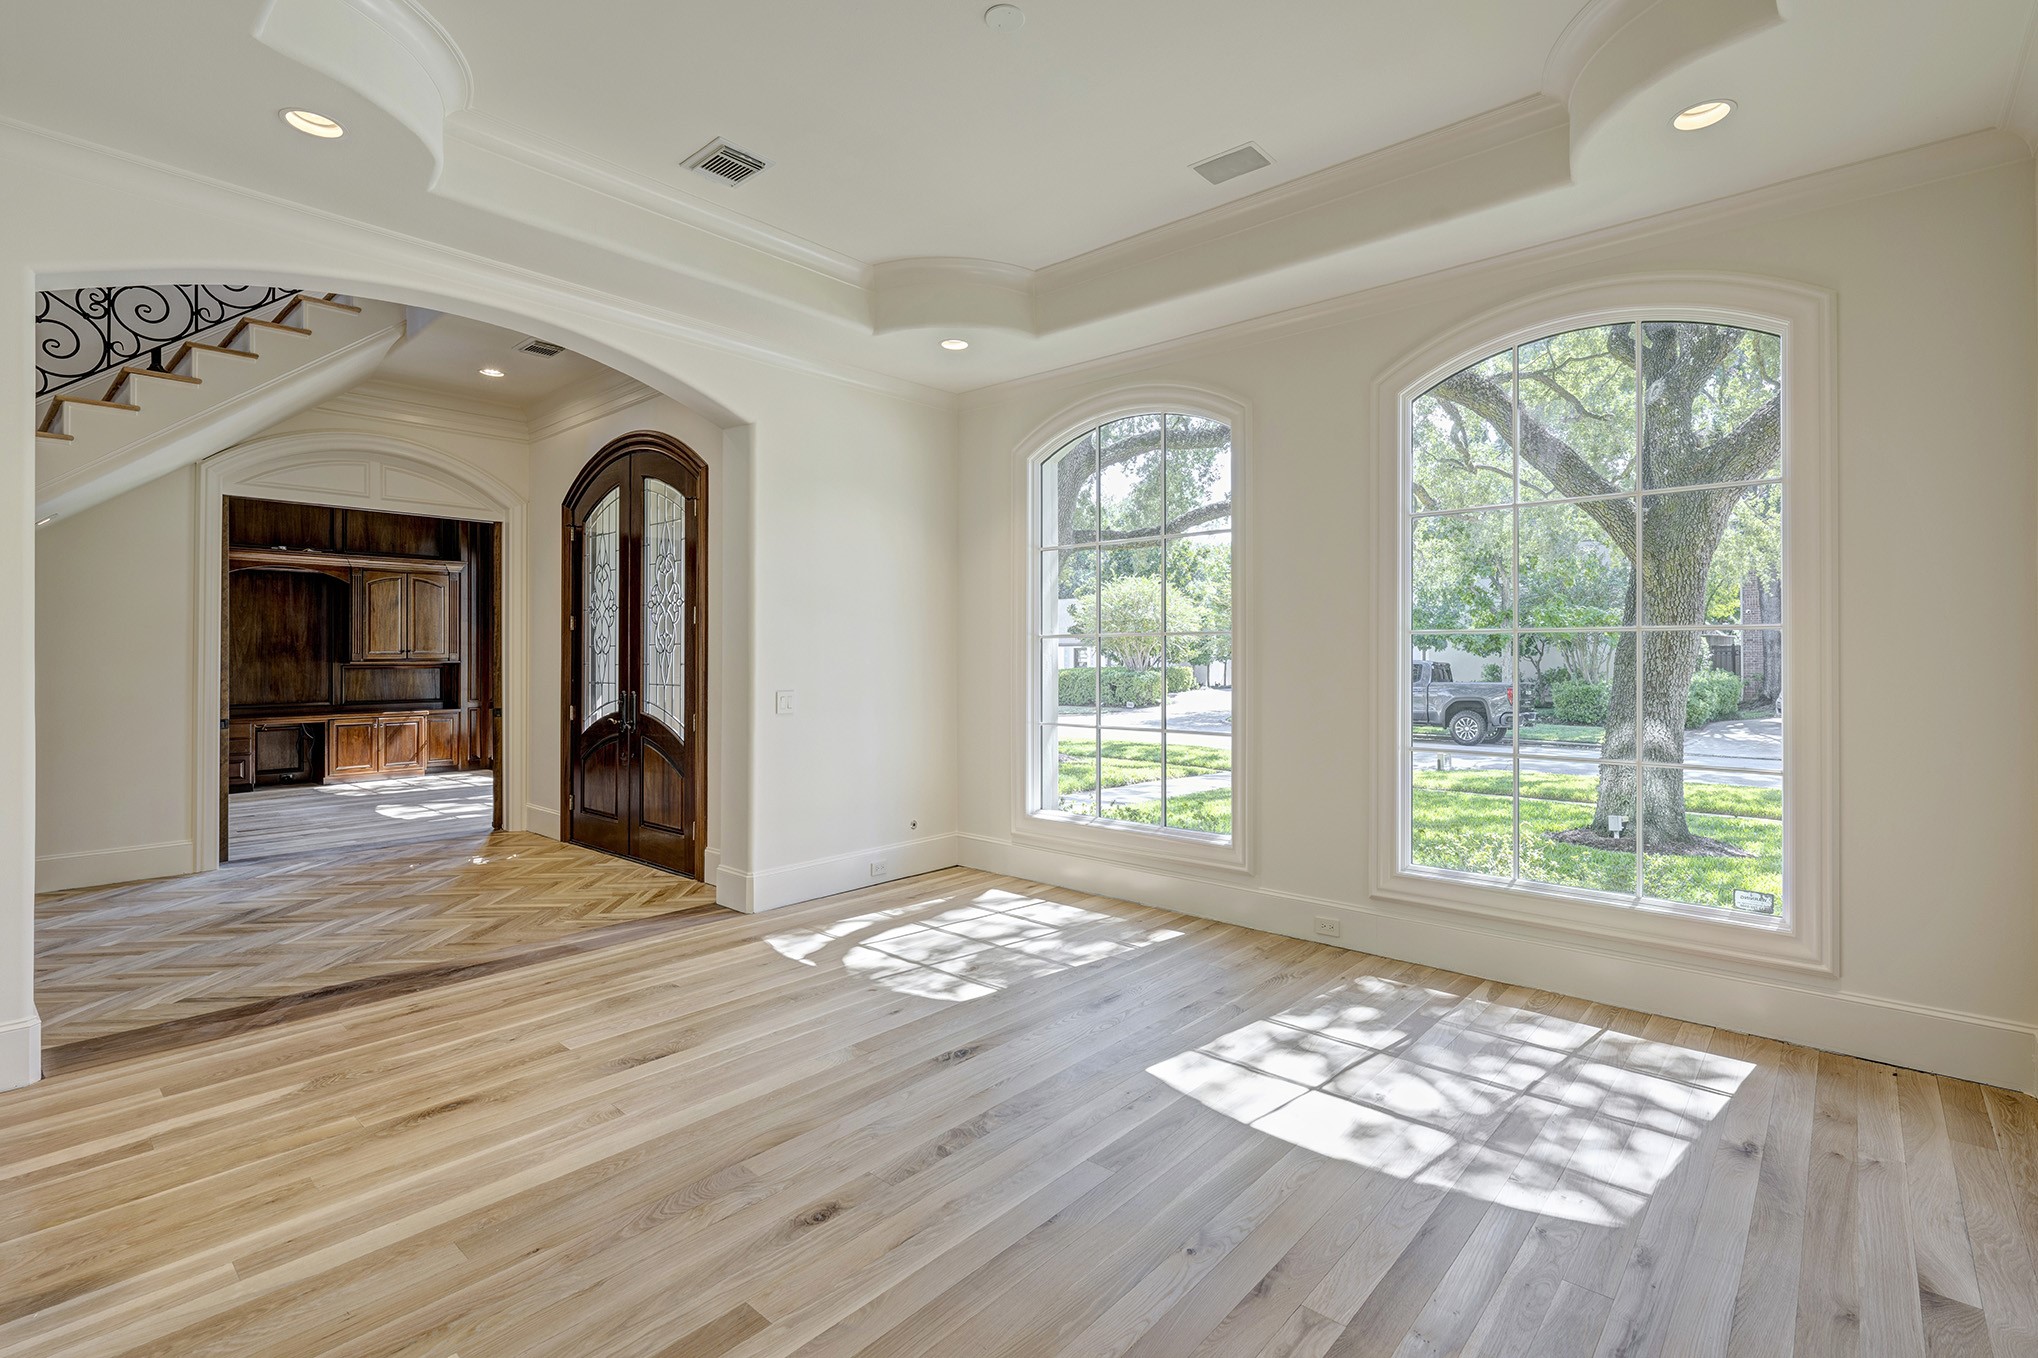 Formal dining room directly off the entry features wood floors, high ceiling and large windows.